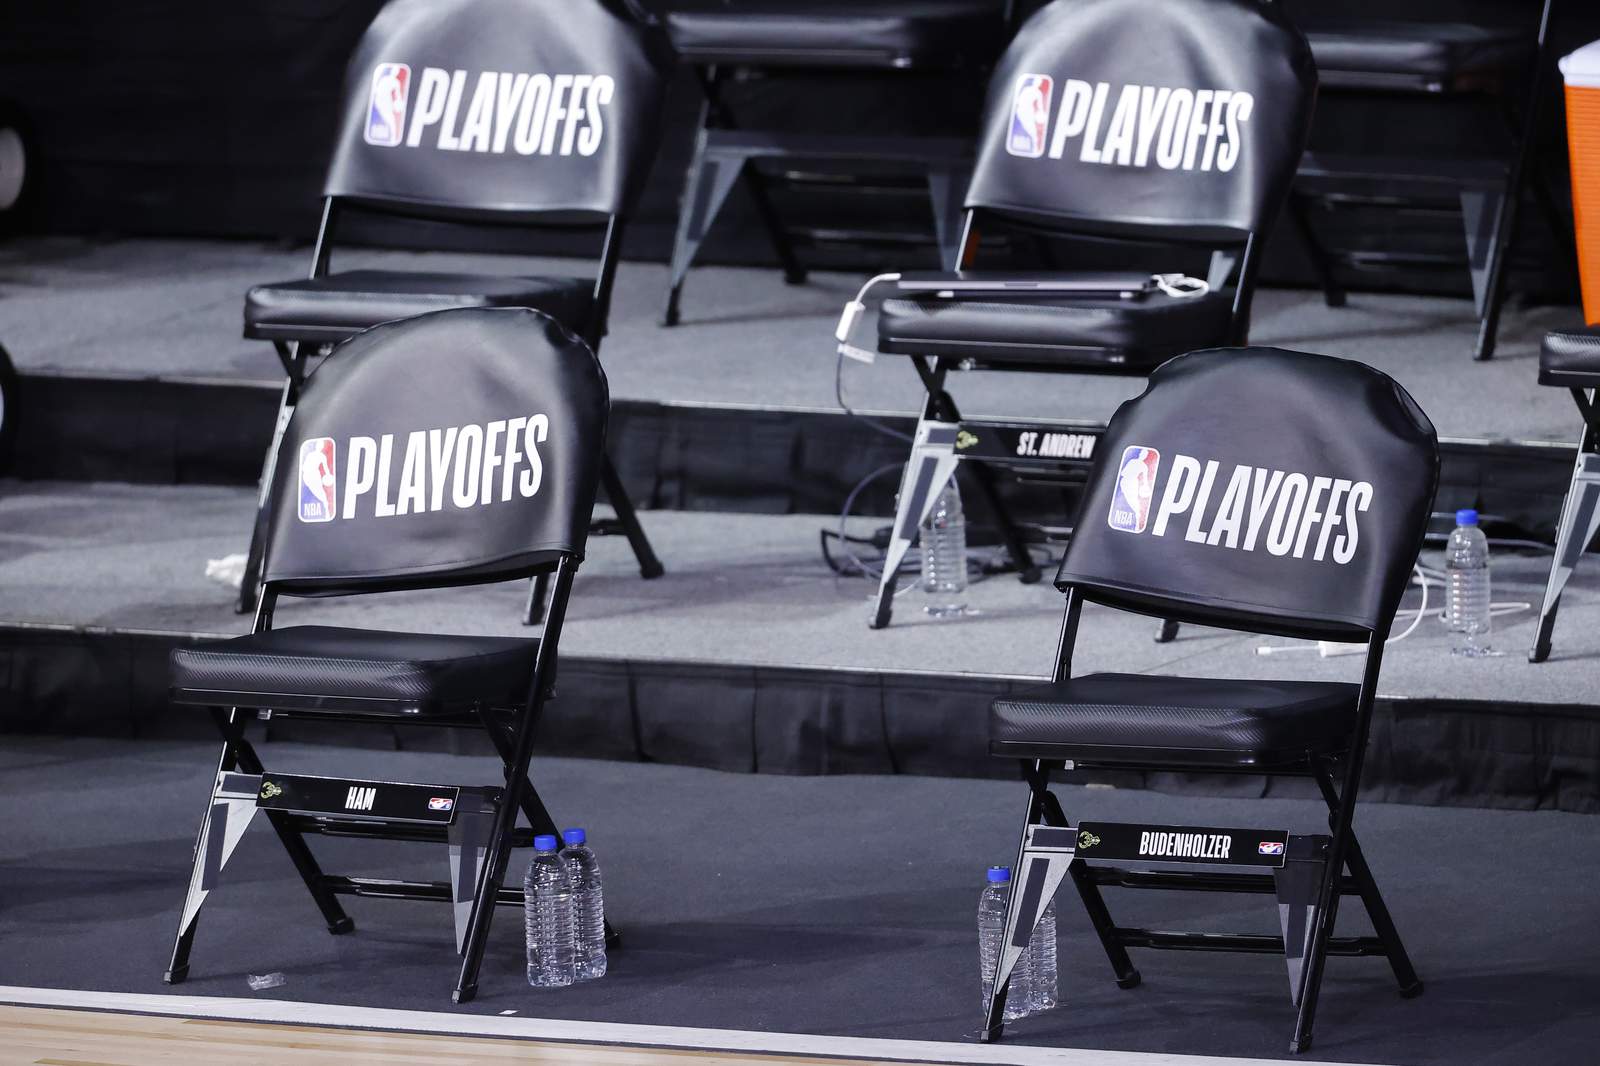 Boycott: NBA playoff games called off amid player protest